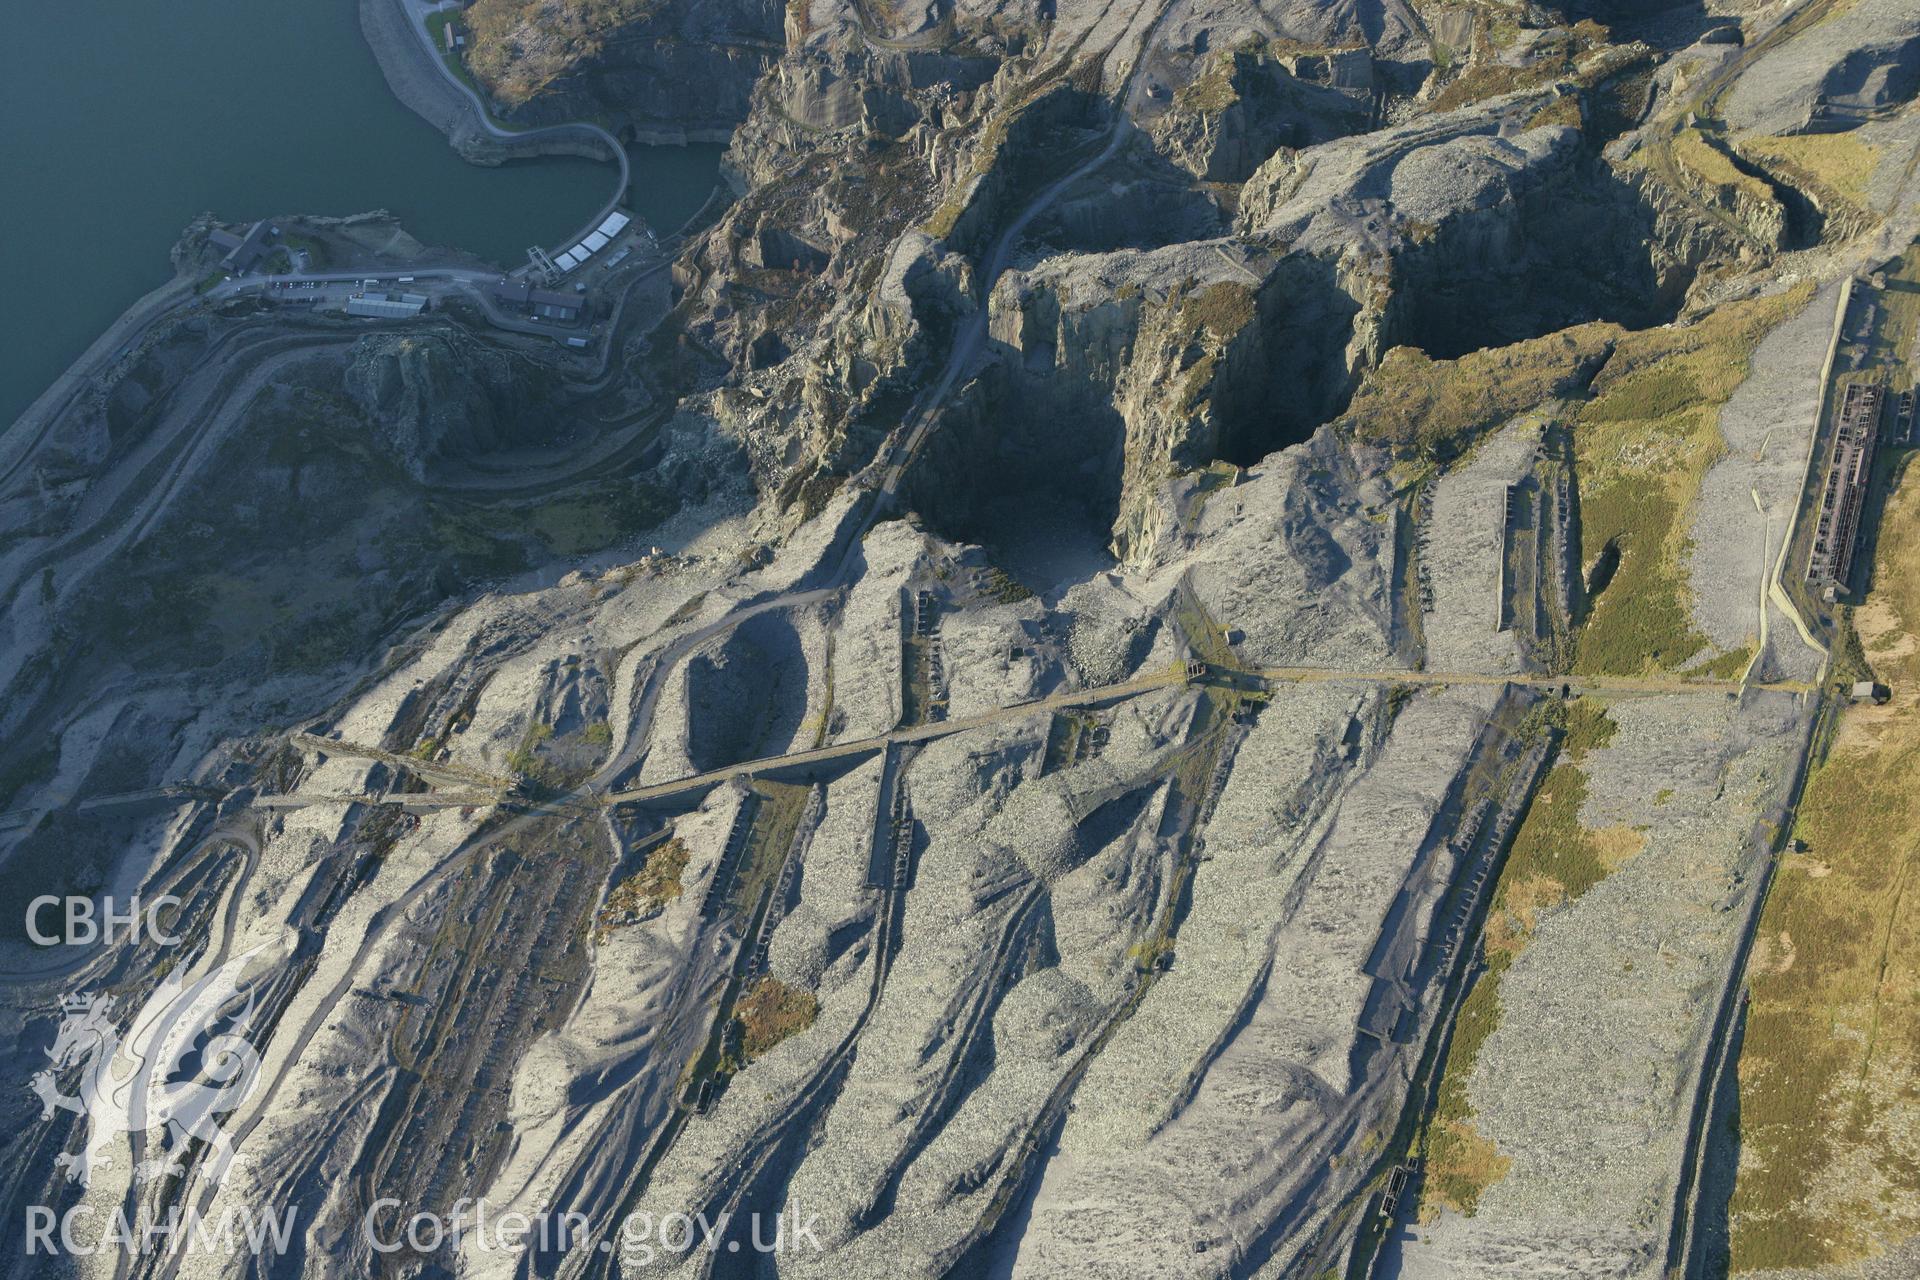 RCAHMW colour oblique photograph of Dinorwic Slate Quarry. Taken by Toby Driver on 20/12/2007.